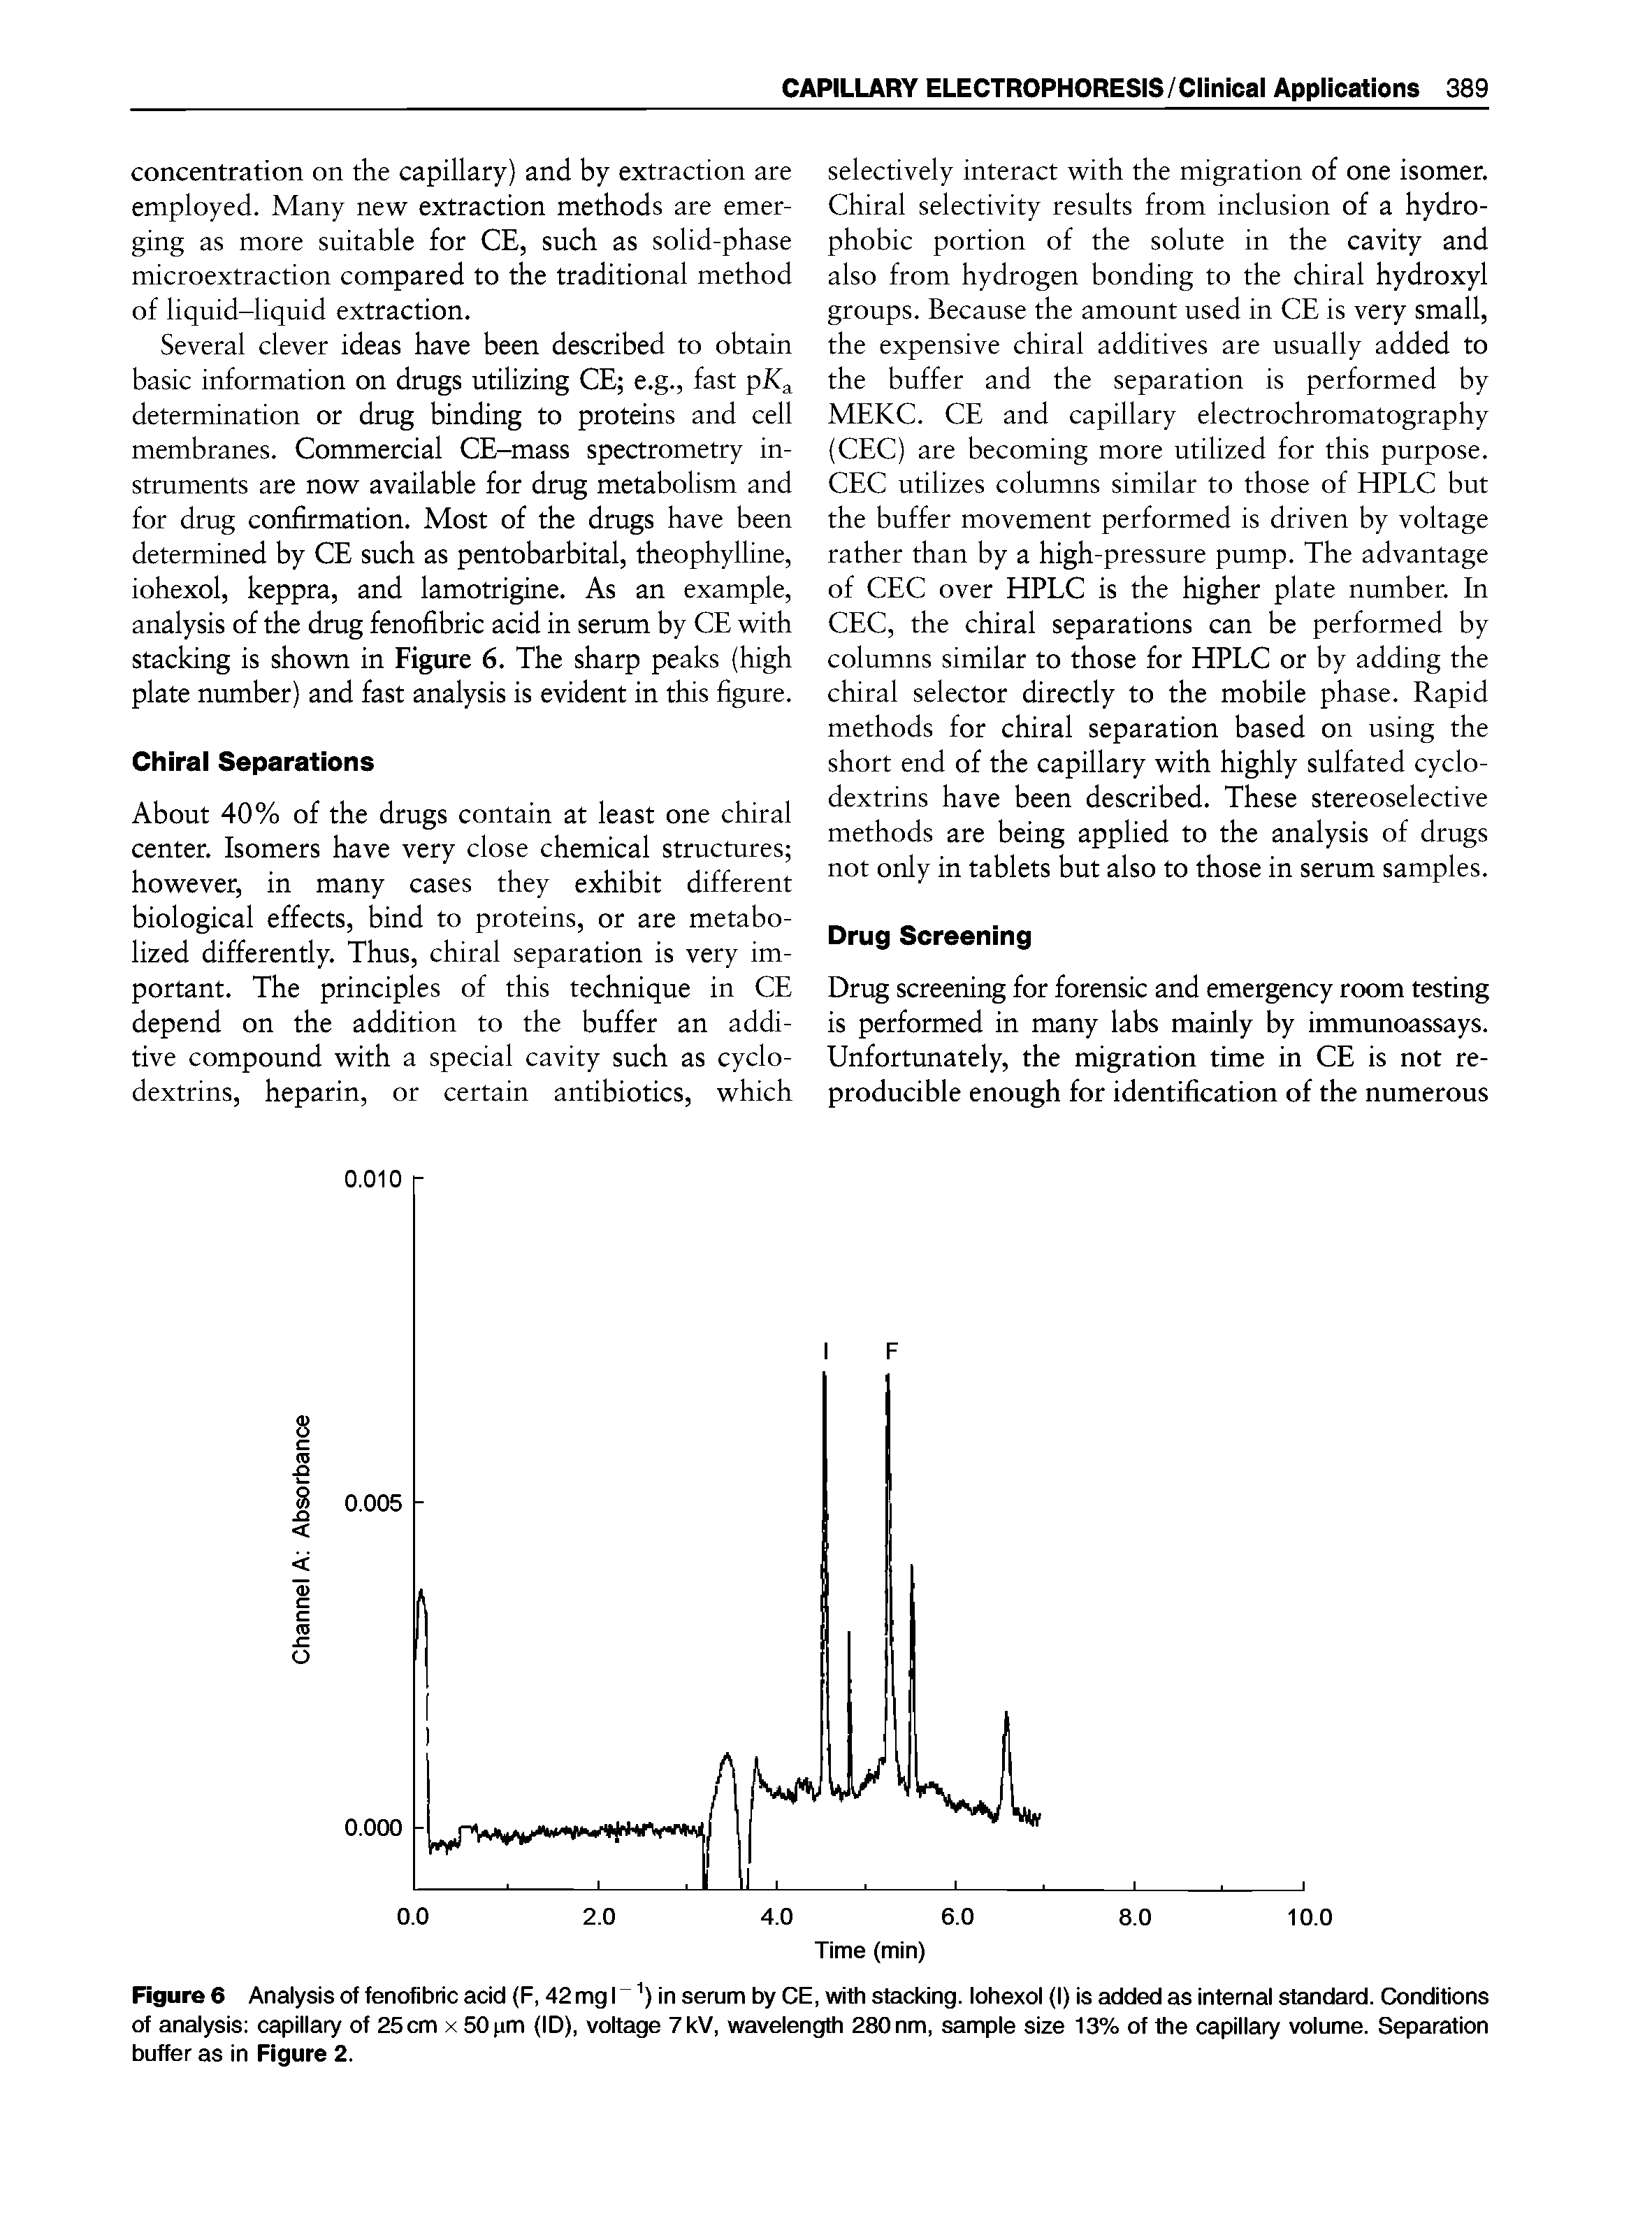 Figure 6 Analysis of fenofibric acid (F, 42 mg I h in serum by CE, with stacking. Iohexol (I) is added as internal standard. Conditions of analysis capillary of 25cm x 50pm (ID), voltage 7kV, wavelength 280nm, sample size 13% of the capillary volume. Separation buffer as in Figure 2.